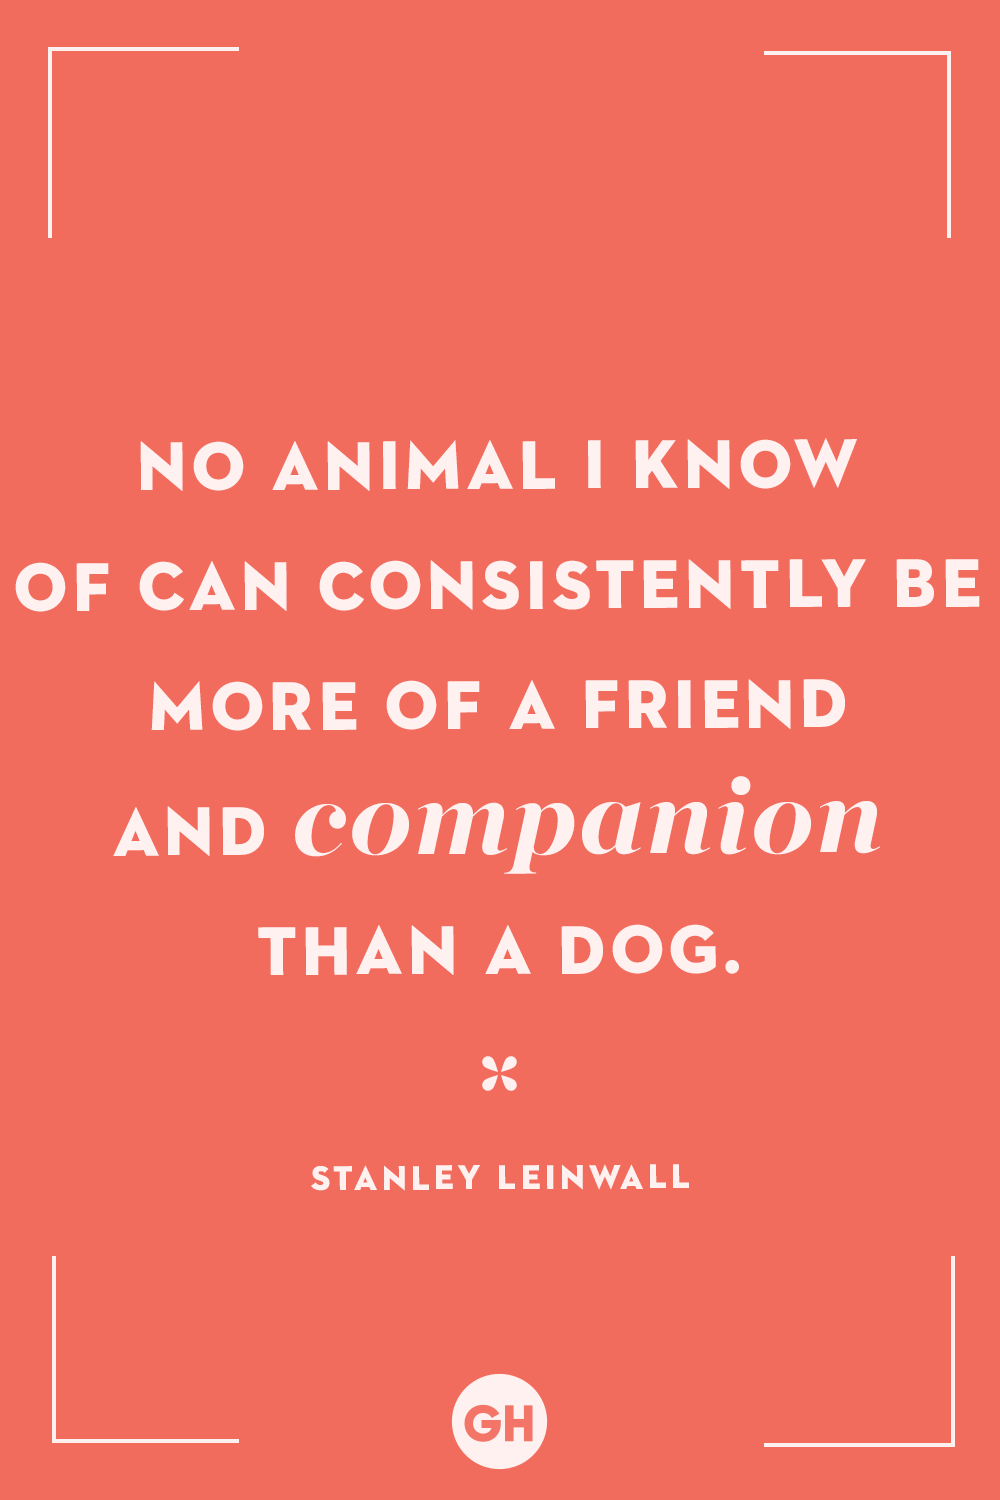 50 Best Dog Quotes - Funny and Cute Quotes About Dogs